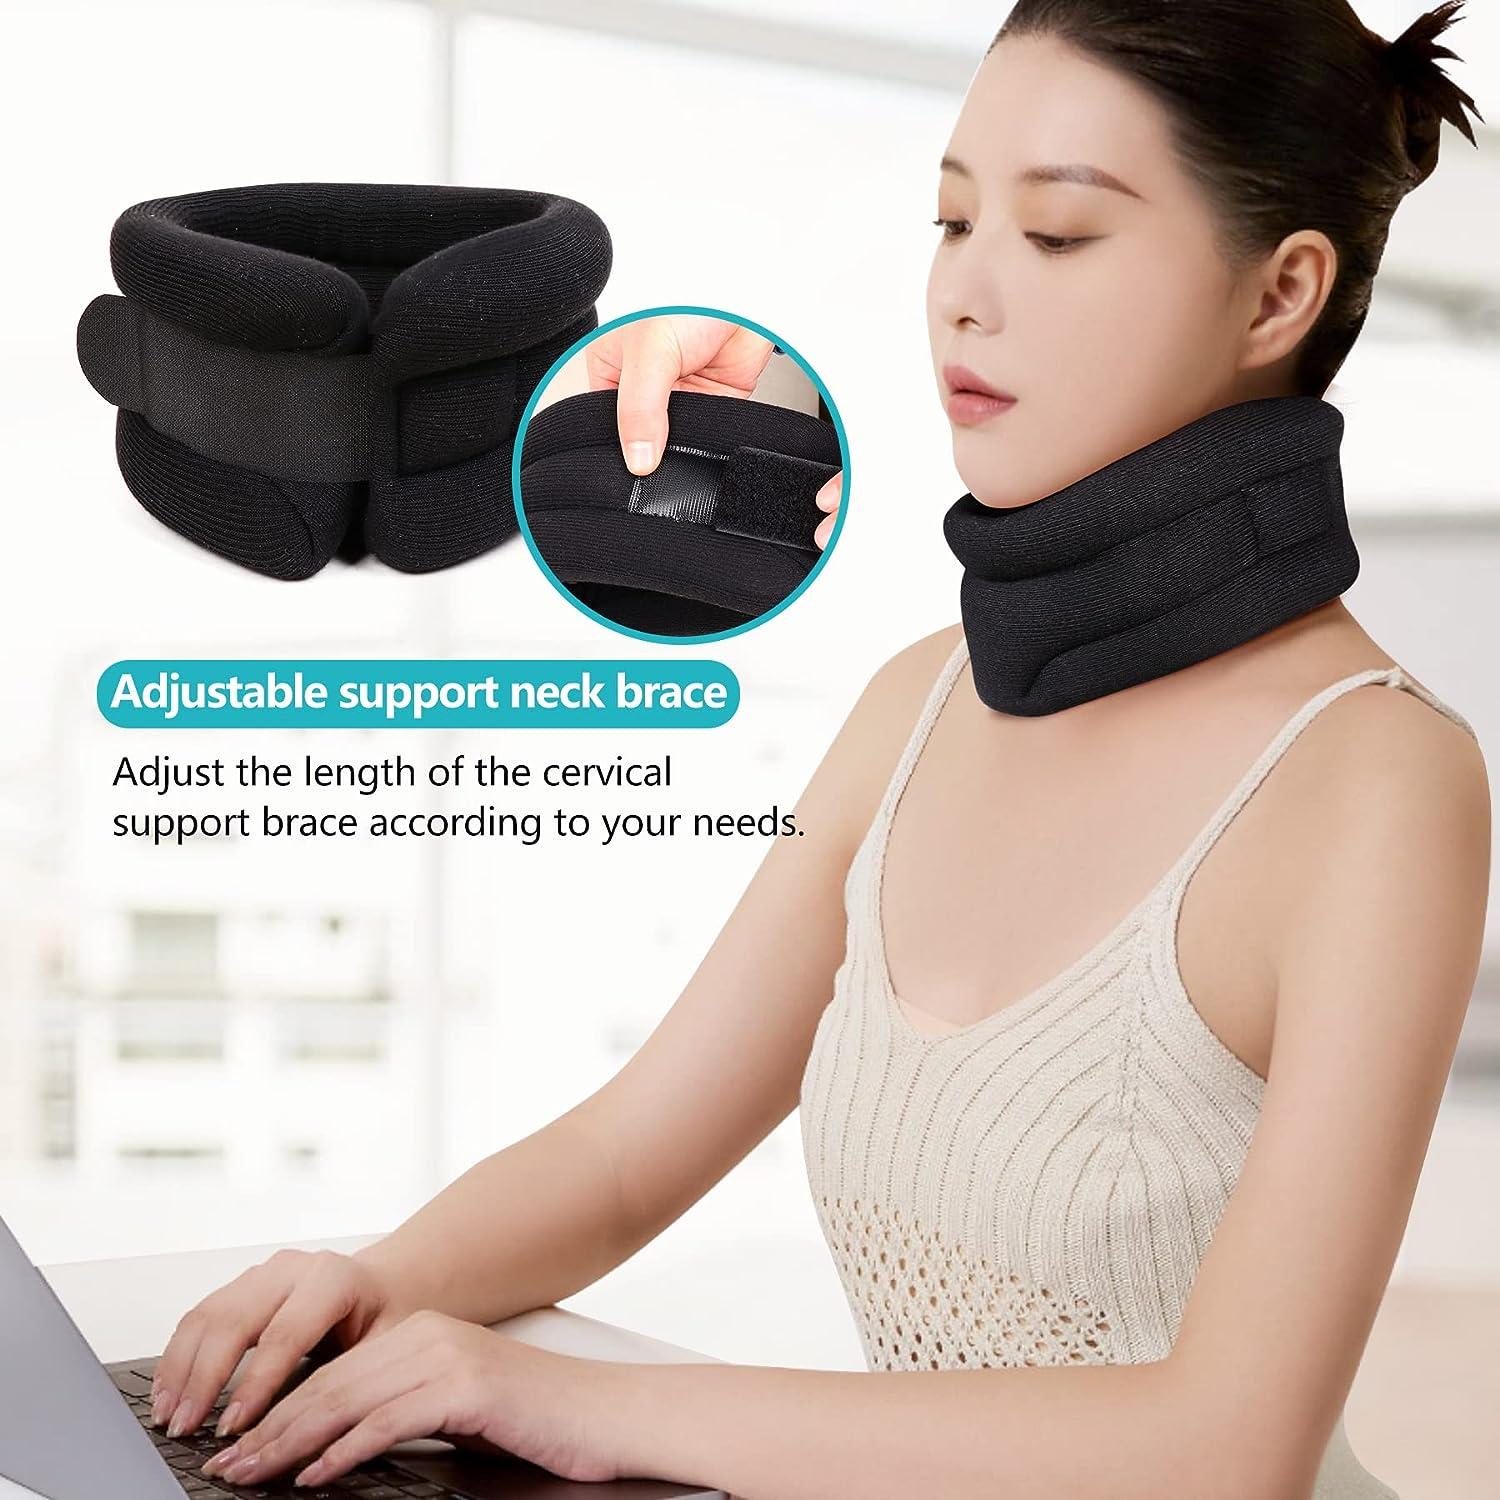  Neck Brace For Neck Pain And Support, Foam Cervical